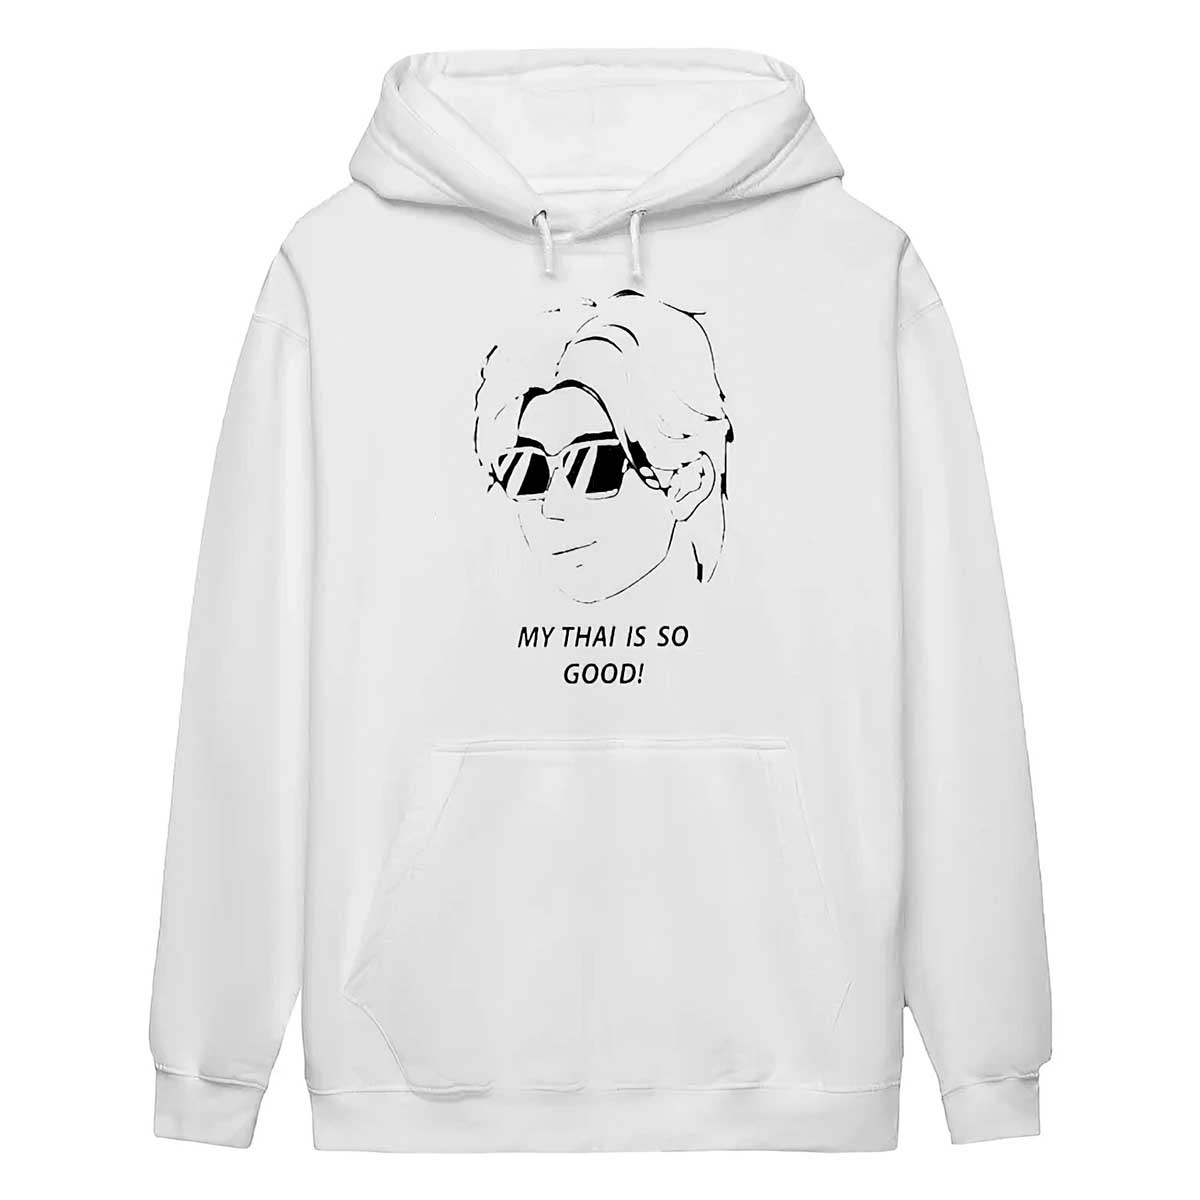 Mean Girls Sweatshirt Doesn't Go Here Black Pullover